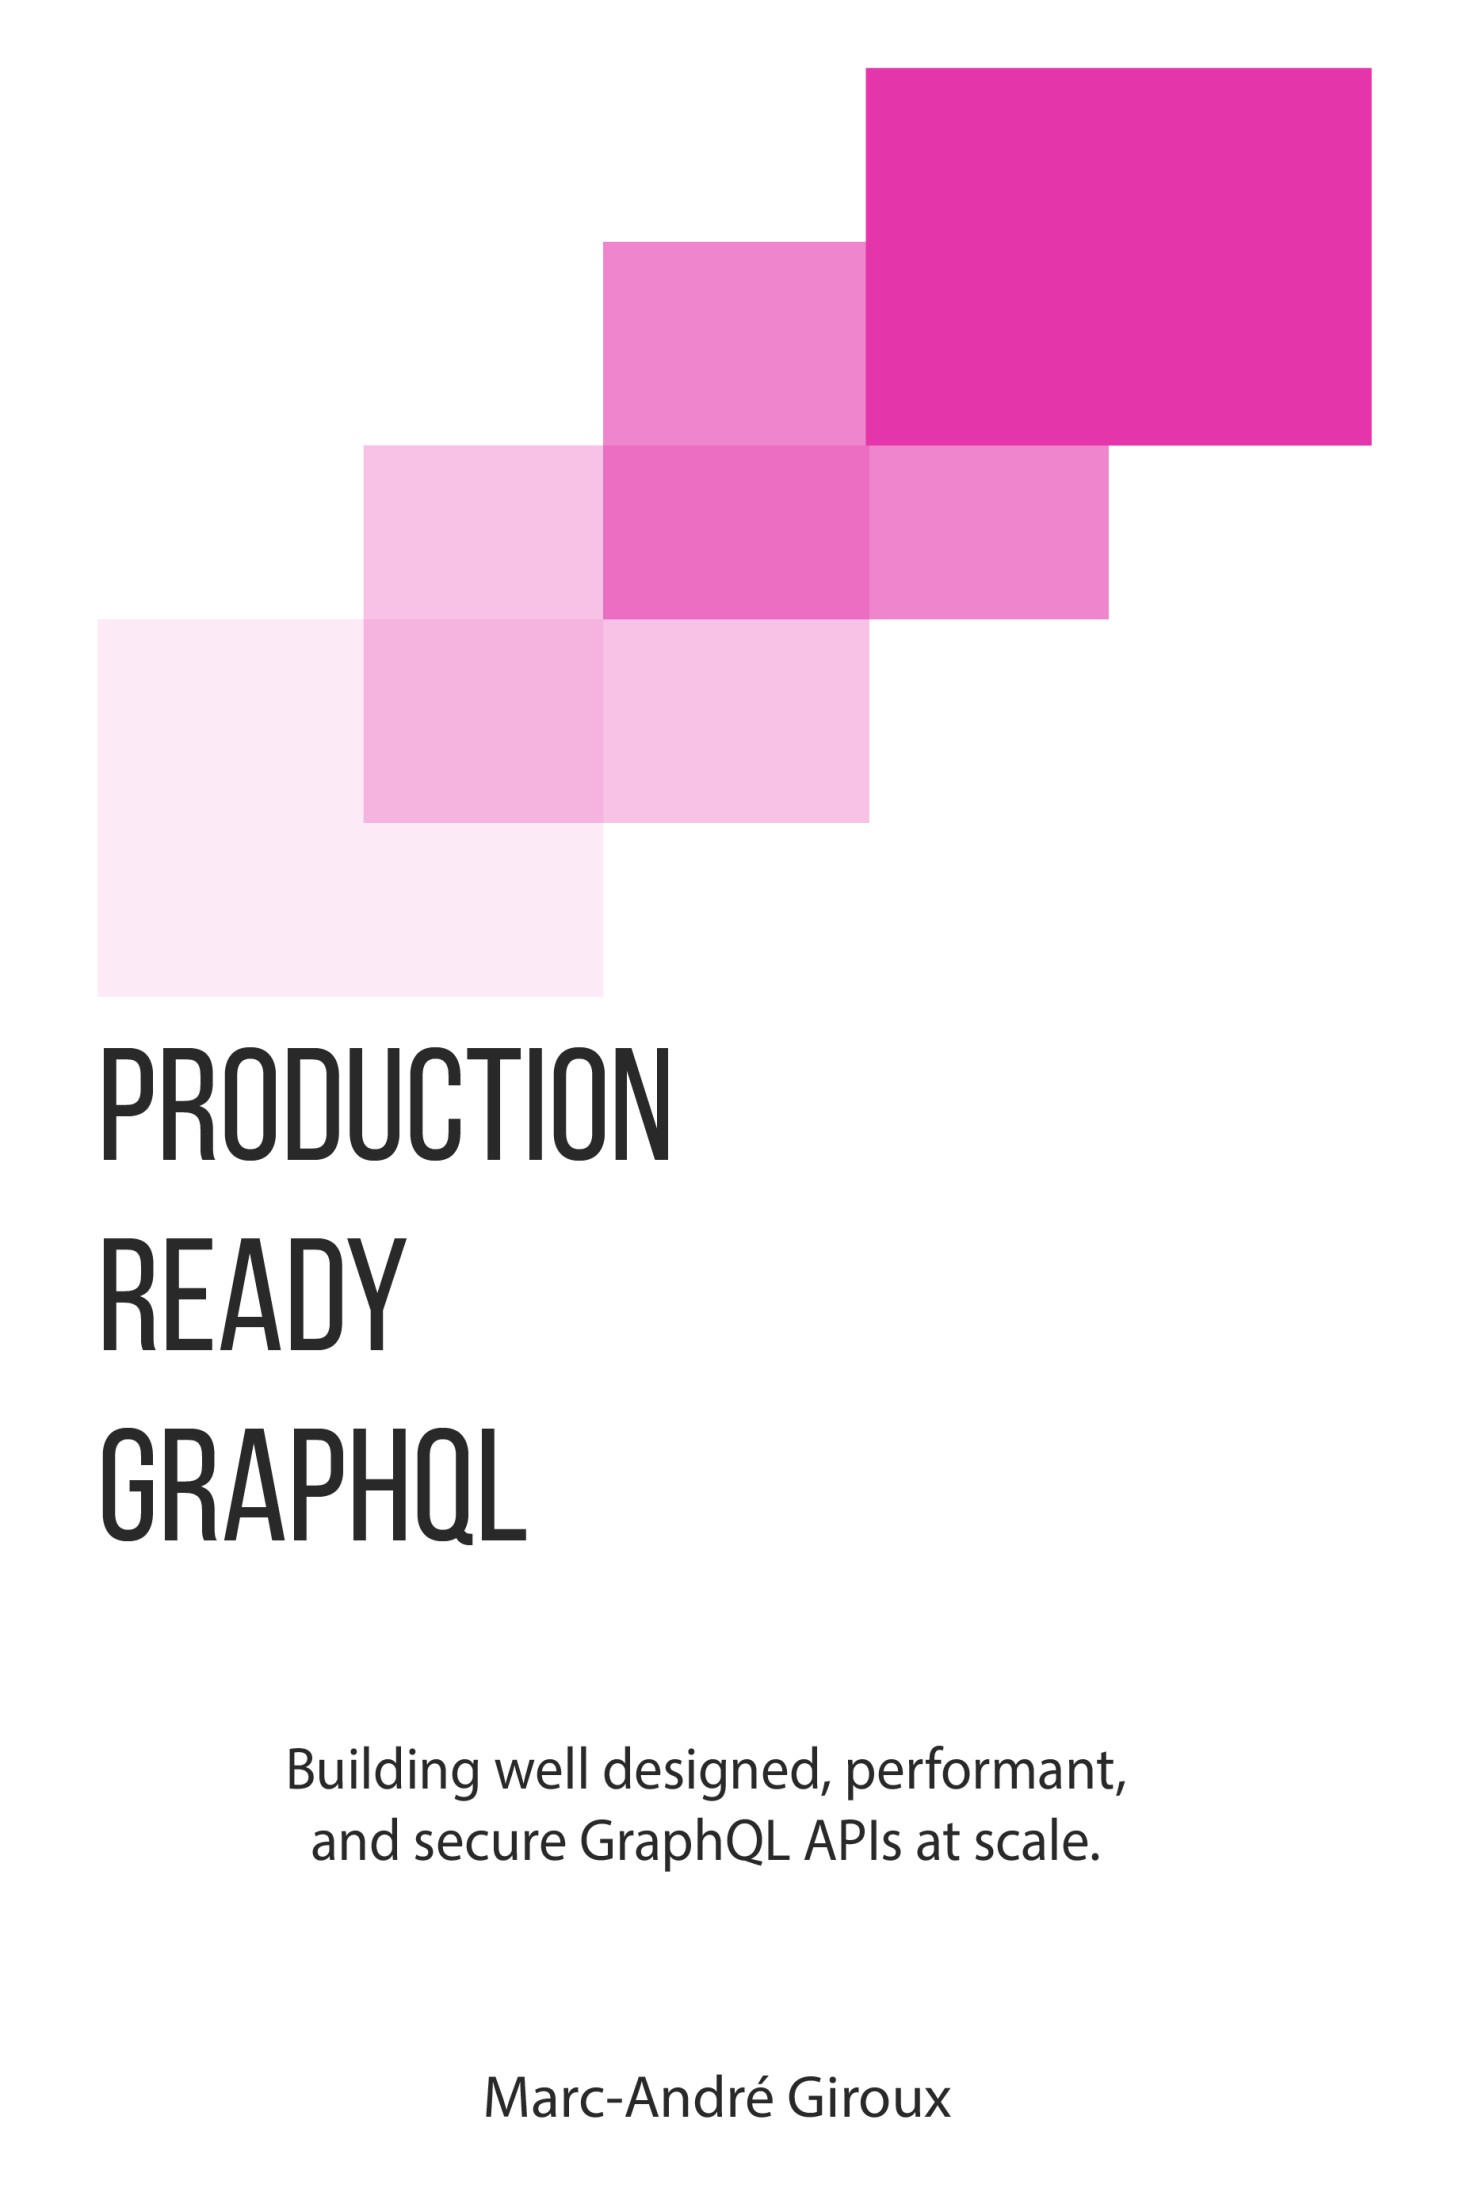 Production Ready GraphQL: Building Well Designed, Performant, and Secure GraphQL APIs at Scale